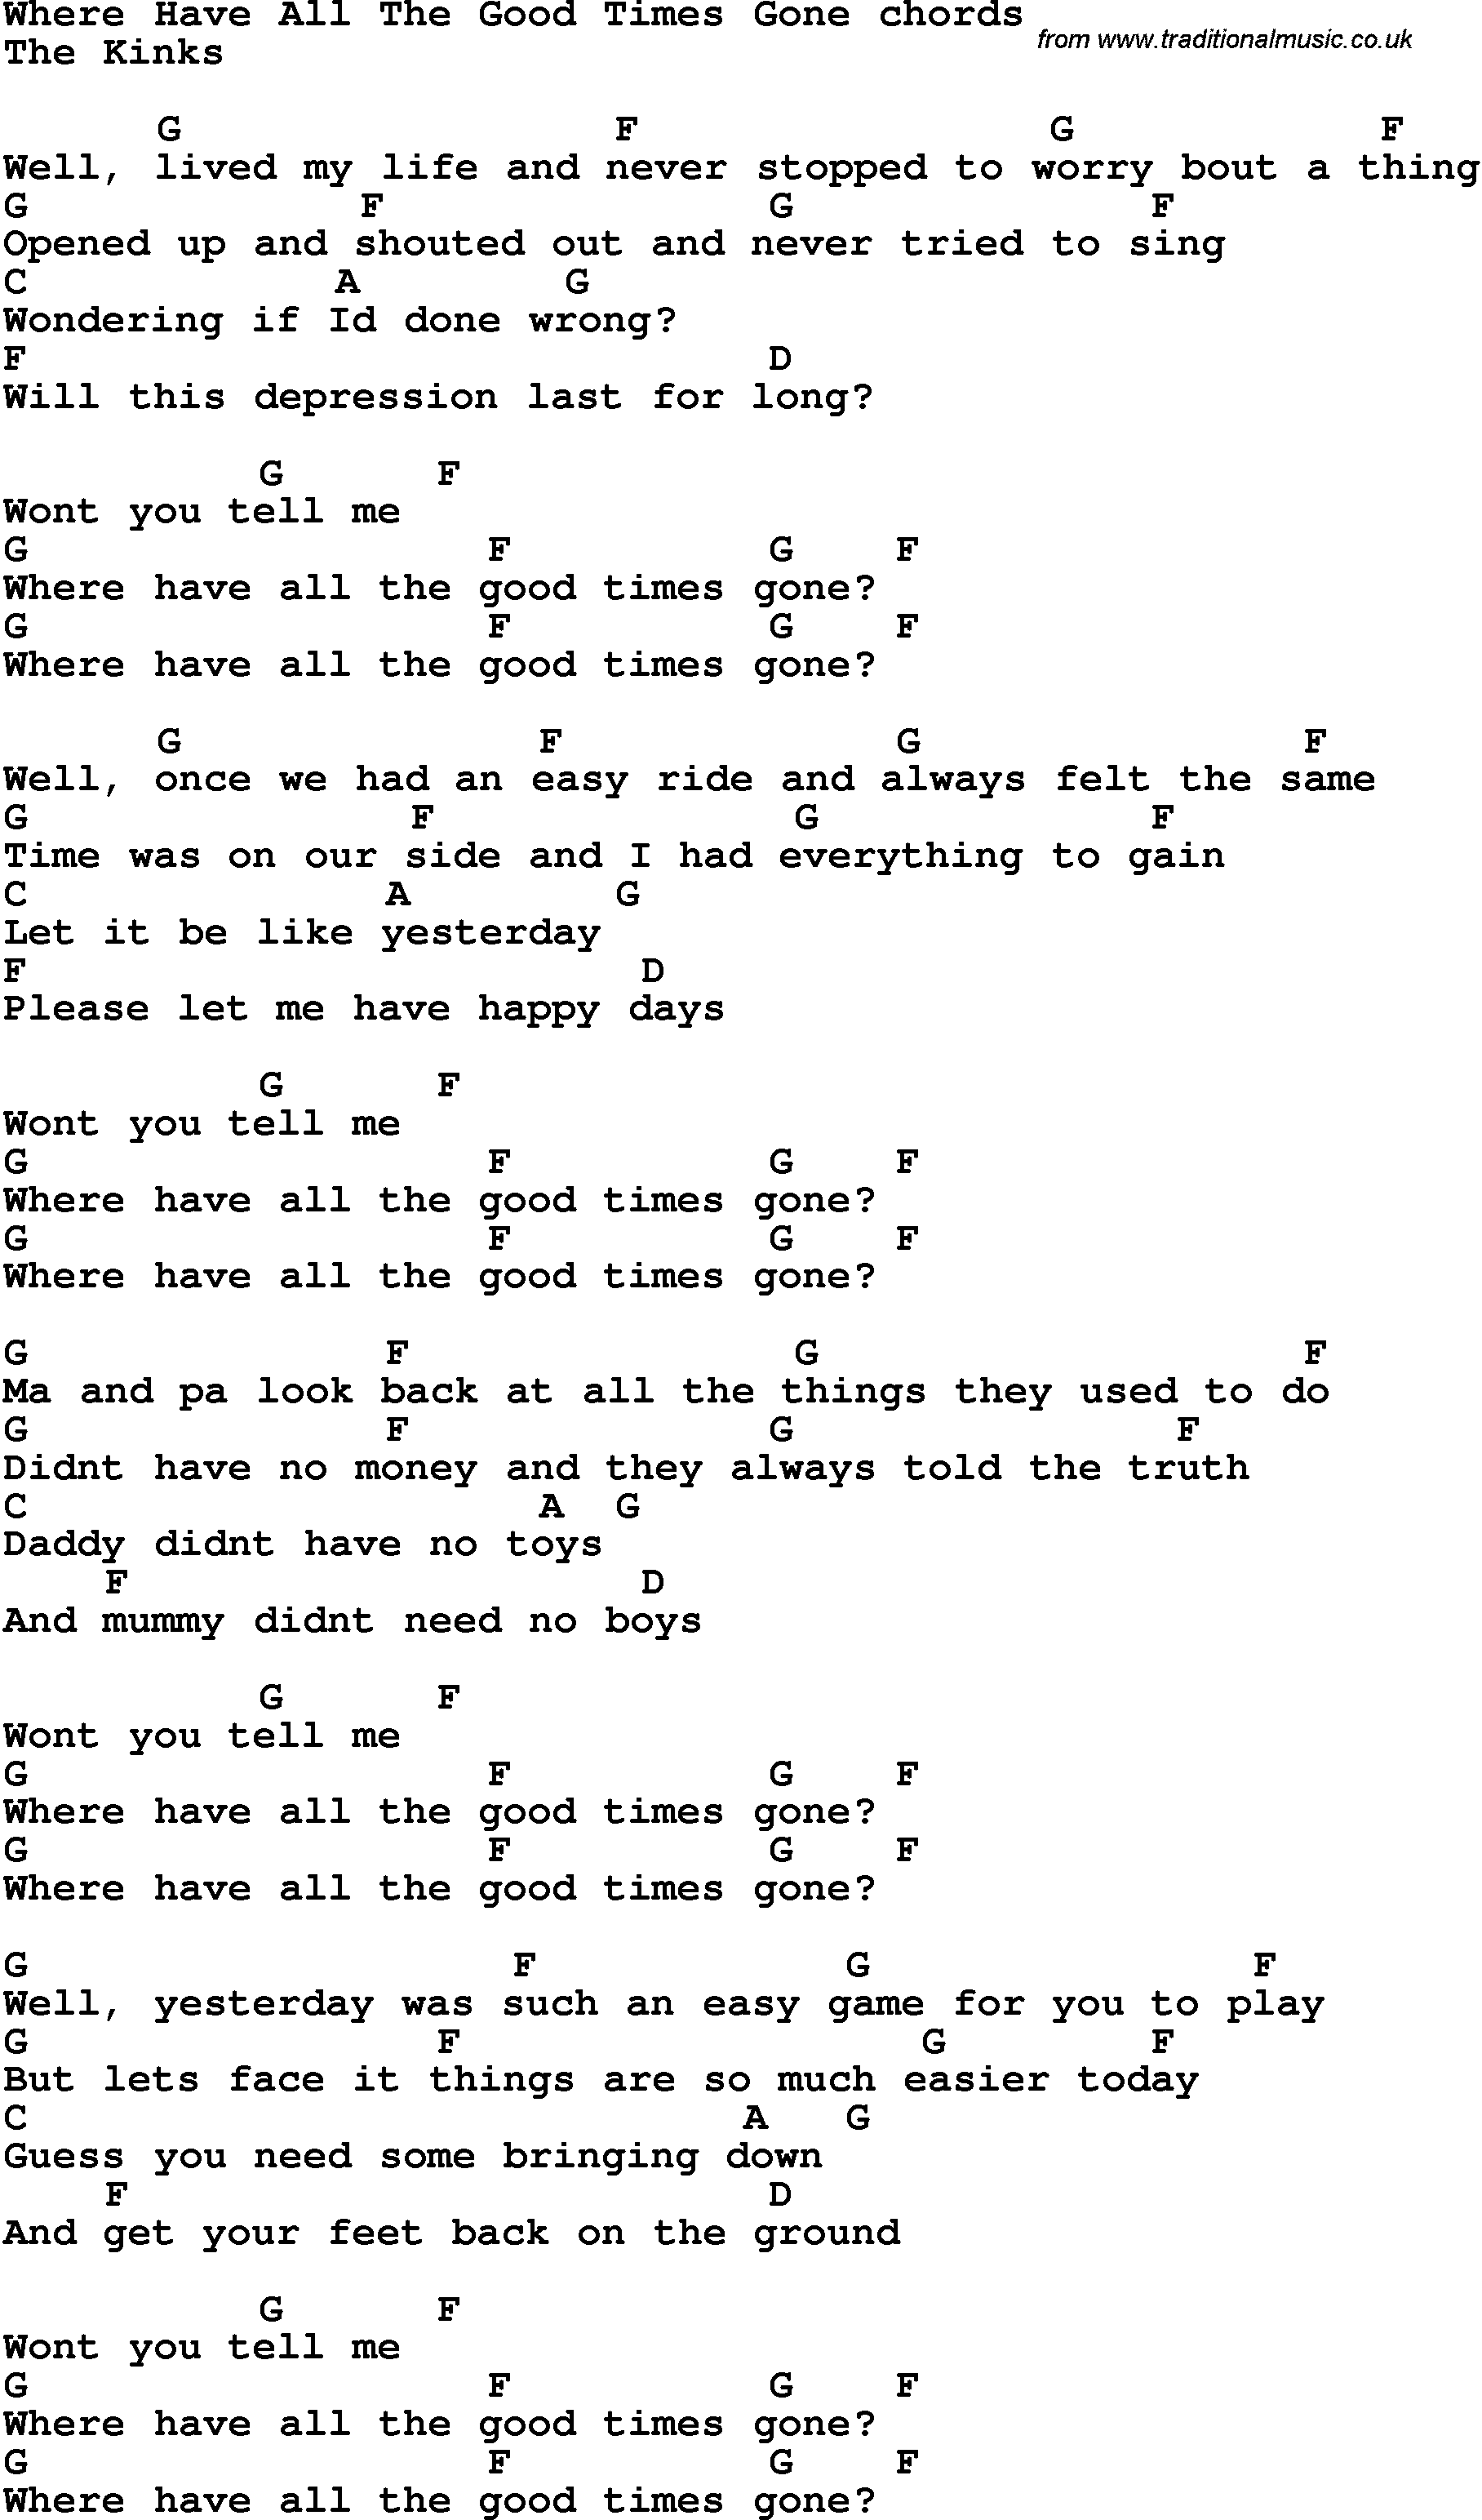 Song Lyrics with guitar chords for Where Have All The Good Times Gone